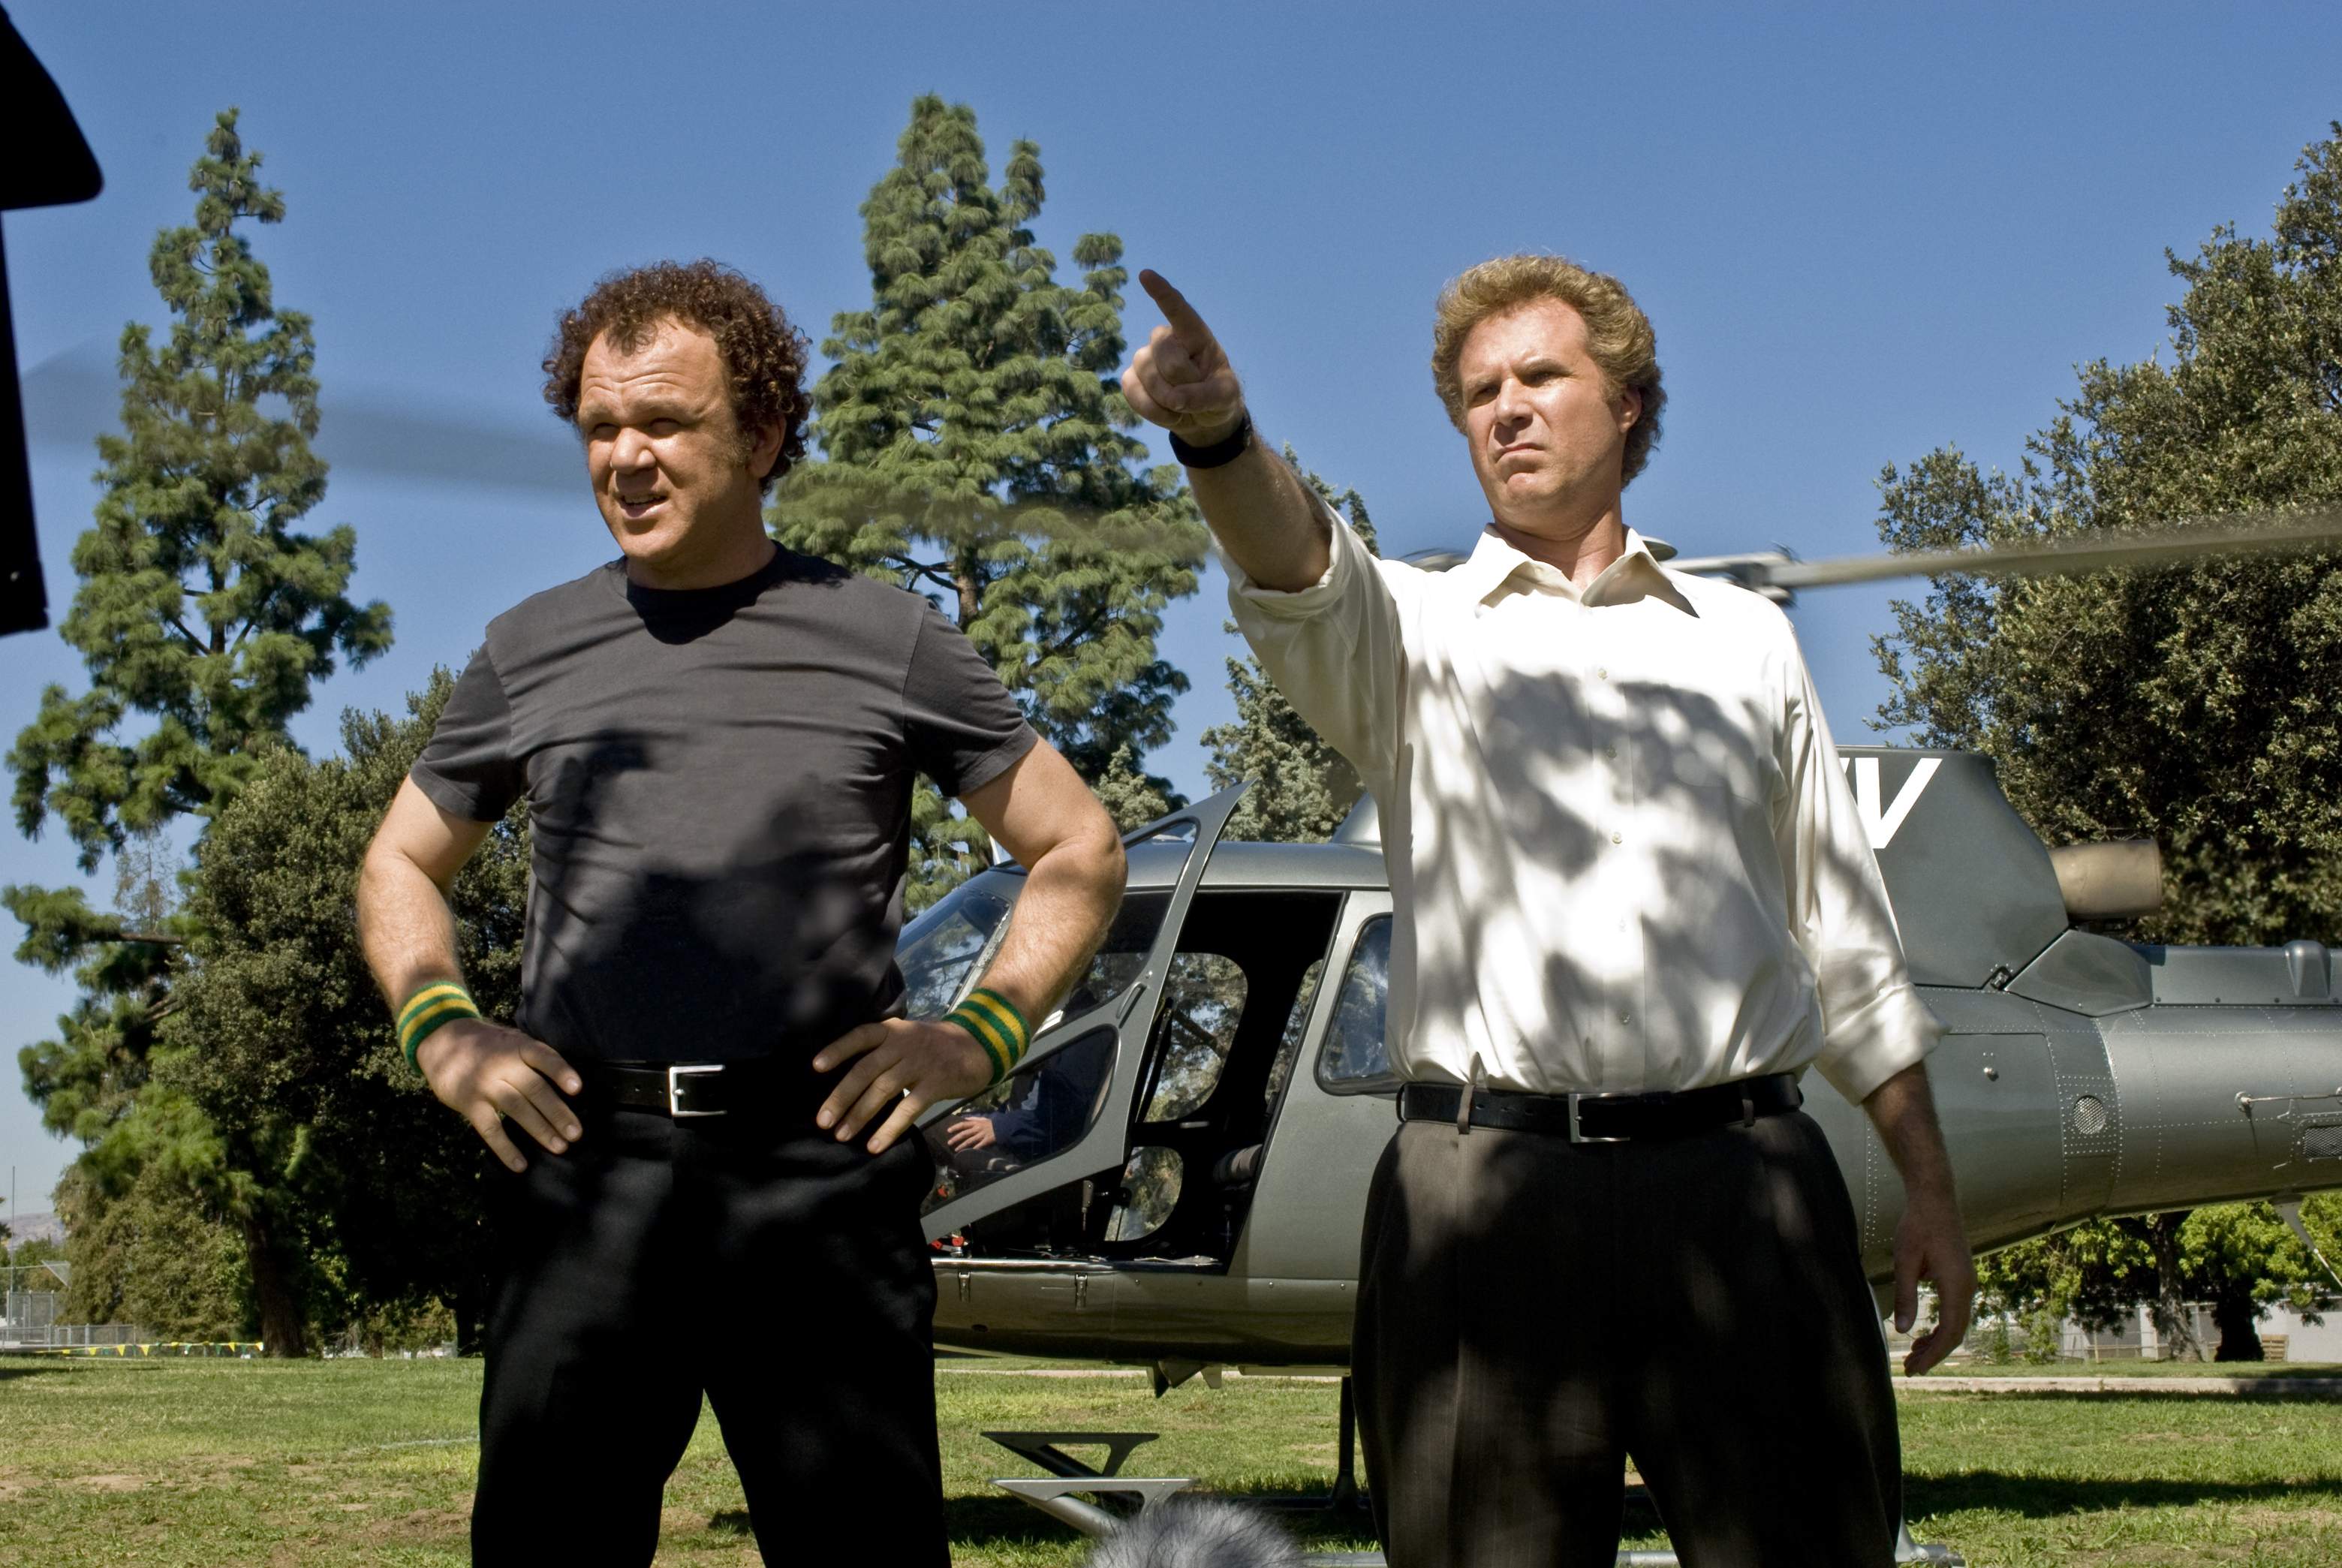 John C. Reilly (left) and Will Ferrell (right) star in Columbia Pictures' comedy STEP BROTHERS.